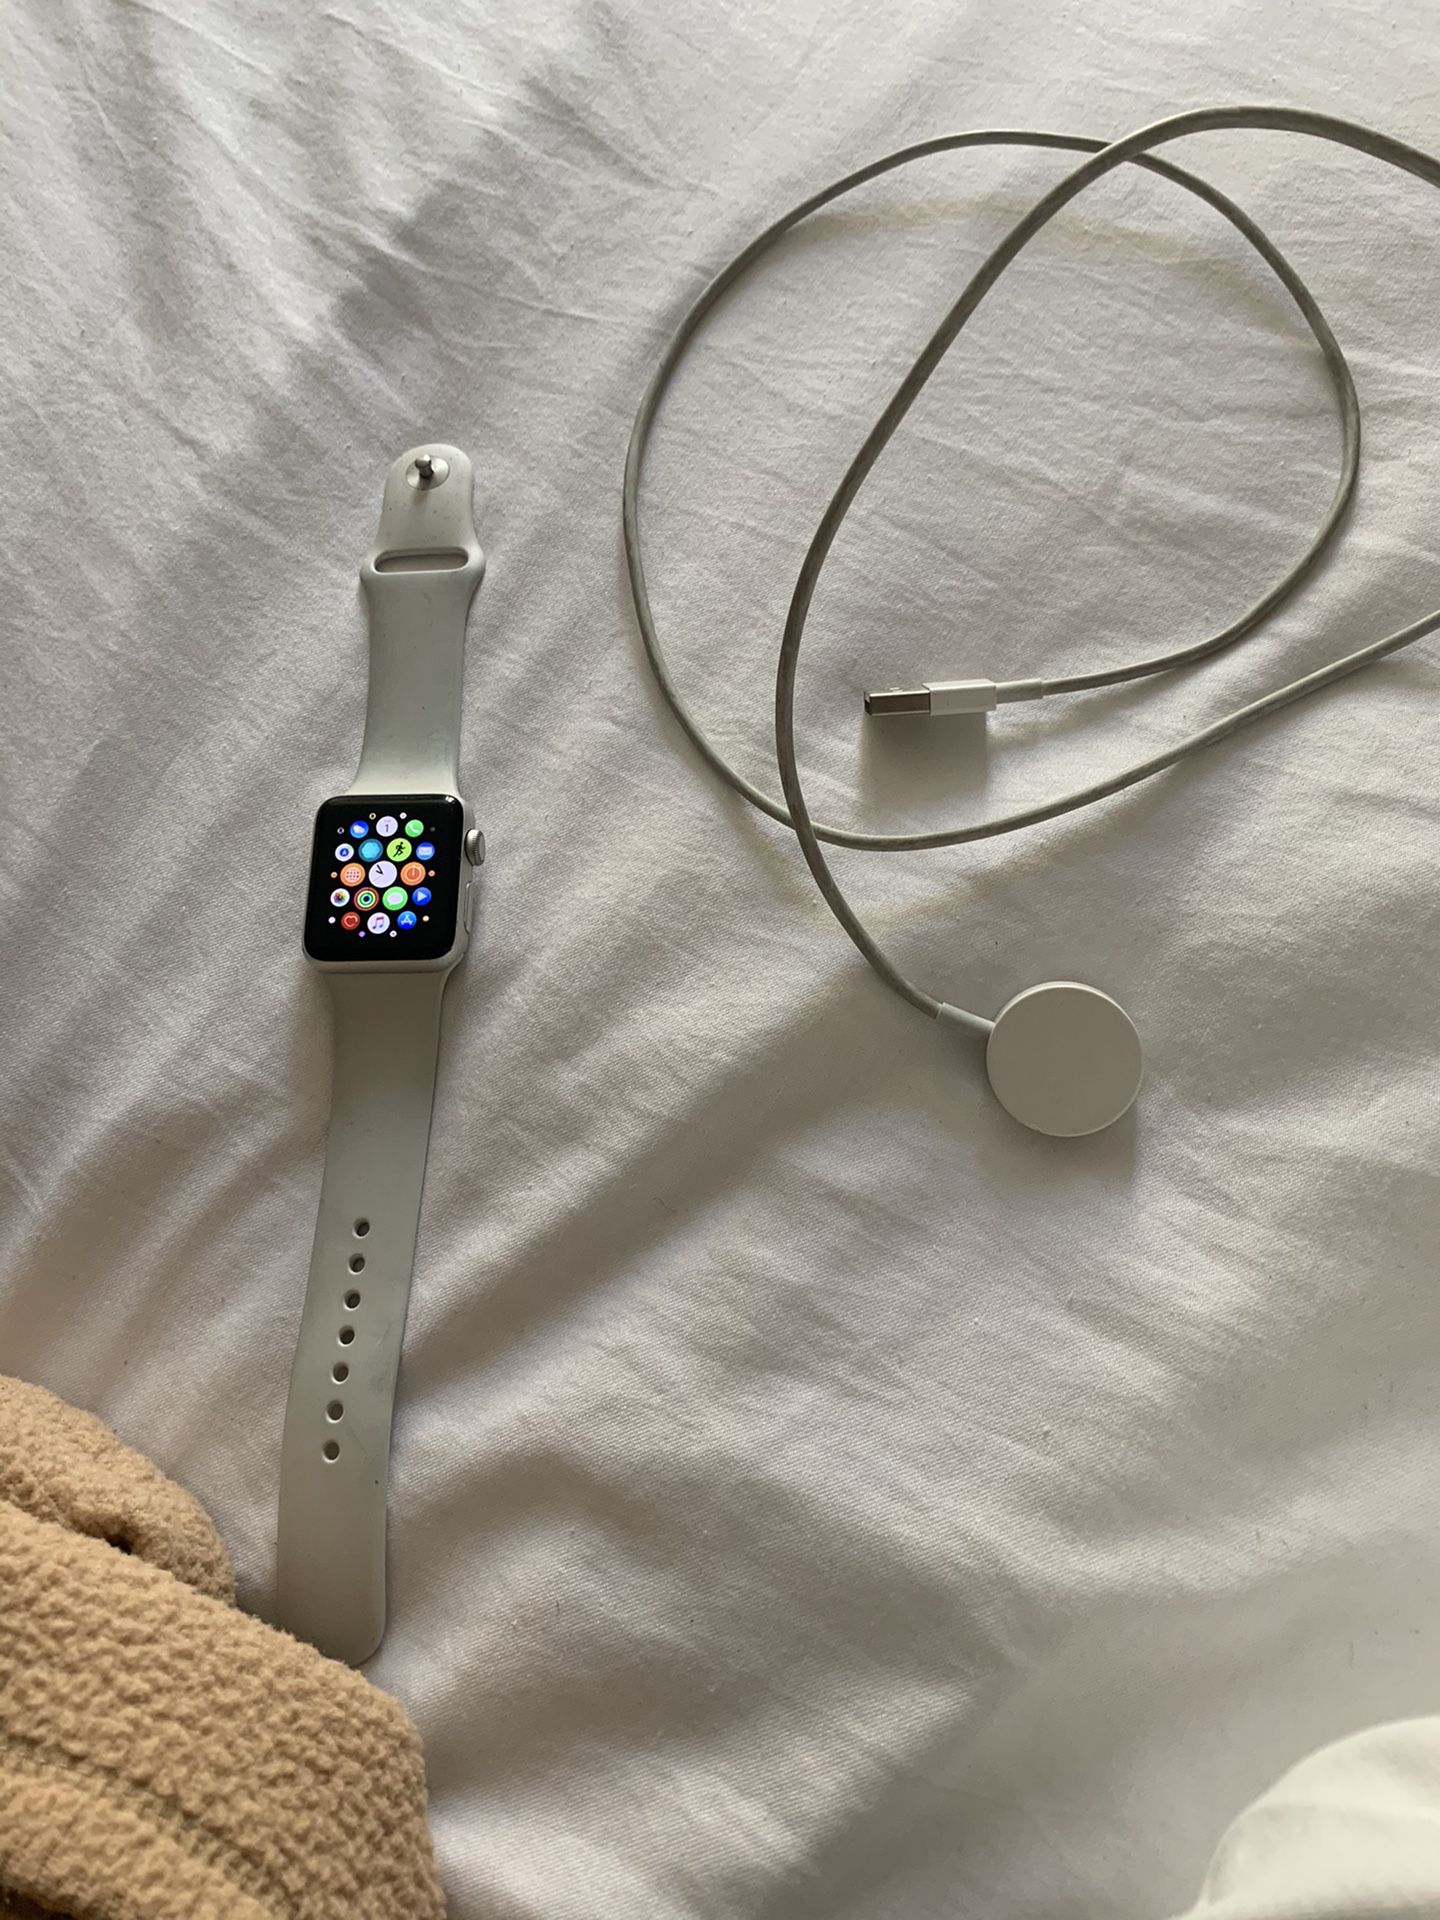 Apple Watch 3 series w/ charger